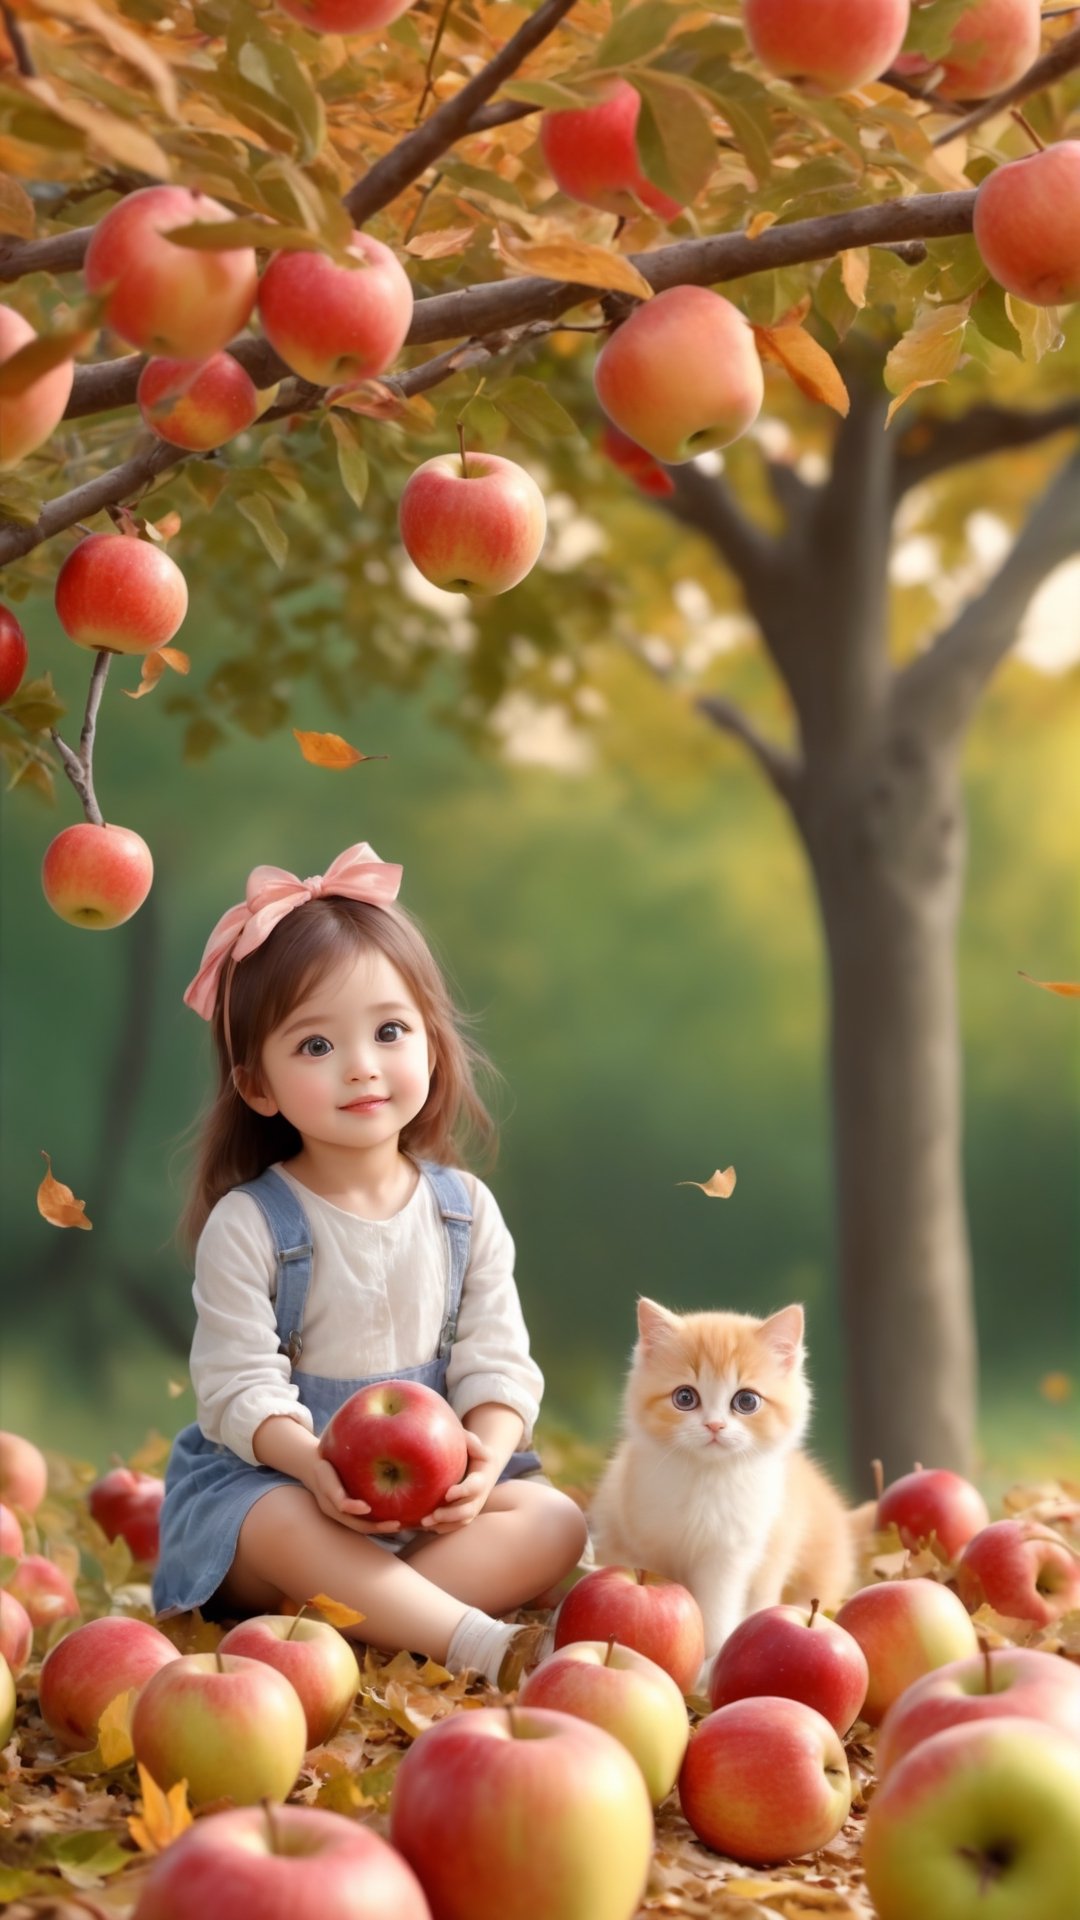  Autumn style, realistic high quality orange tree, apples full the branch, maple leaves falling, Side view shot, Turn around and look ahead, A beautiful big eyes and adorable little girl with two cute little fluffy fat fat kittens walking on the apples tree branch from the treeand road, smiled happily,big eyes so cute and beautiful, under the tree have a table, and apples and beautiful flowers, maple leaves falling, orange near flowers, Turn around and look viewers , pink flowers blooming fantastic amazing and romantic lighting bokeh, pink flowers blooming realistic and green plants amazing tale and lighting as background, Xxmix_Catecat